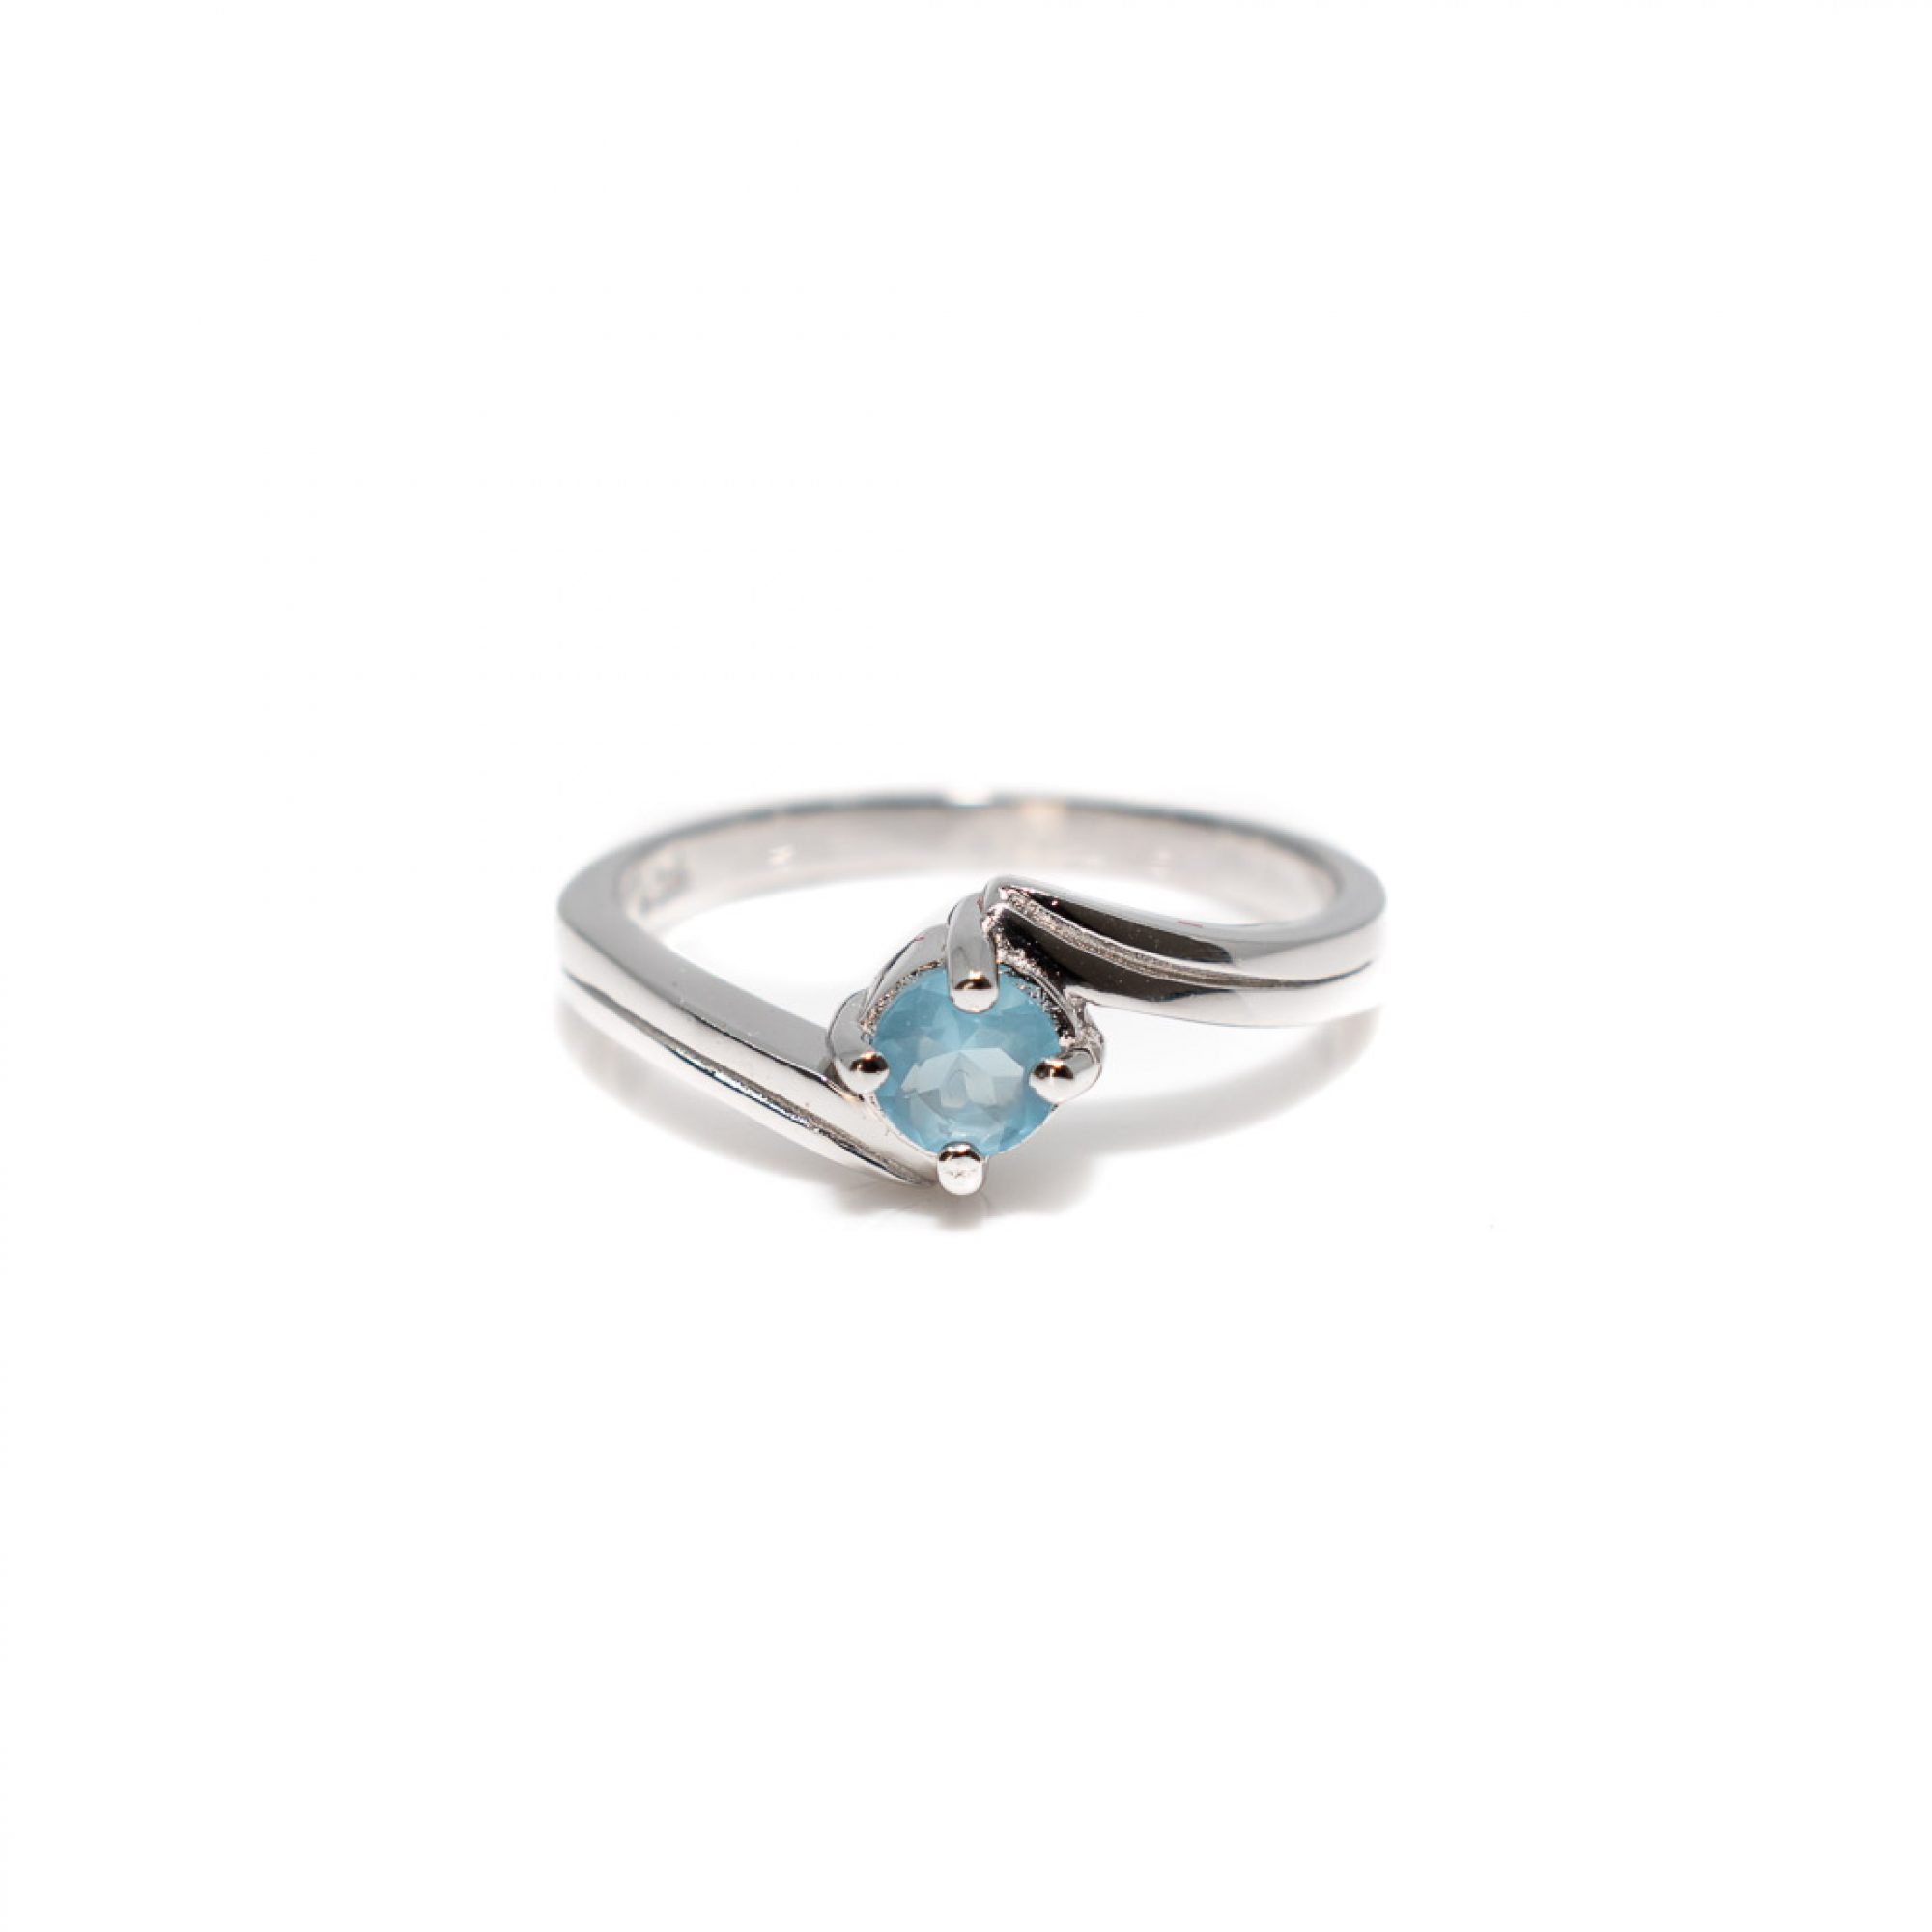 Silver ring with aquamarine stone